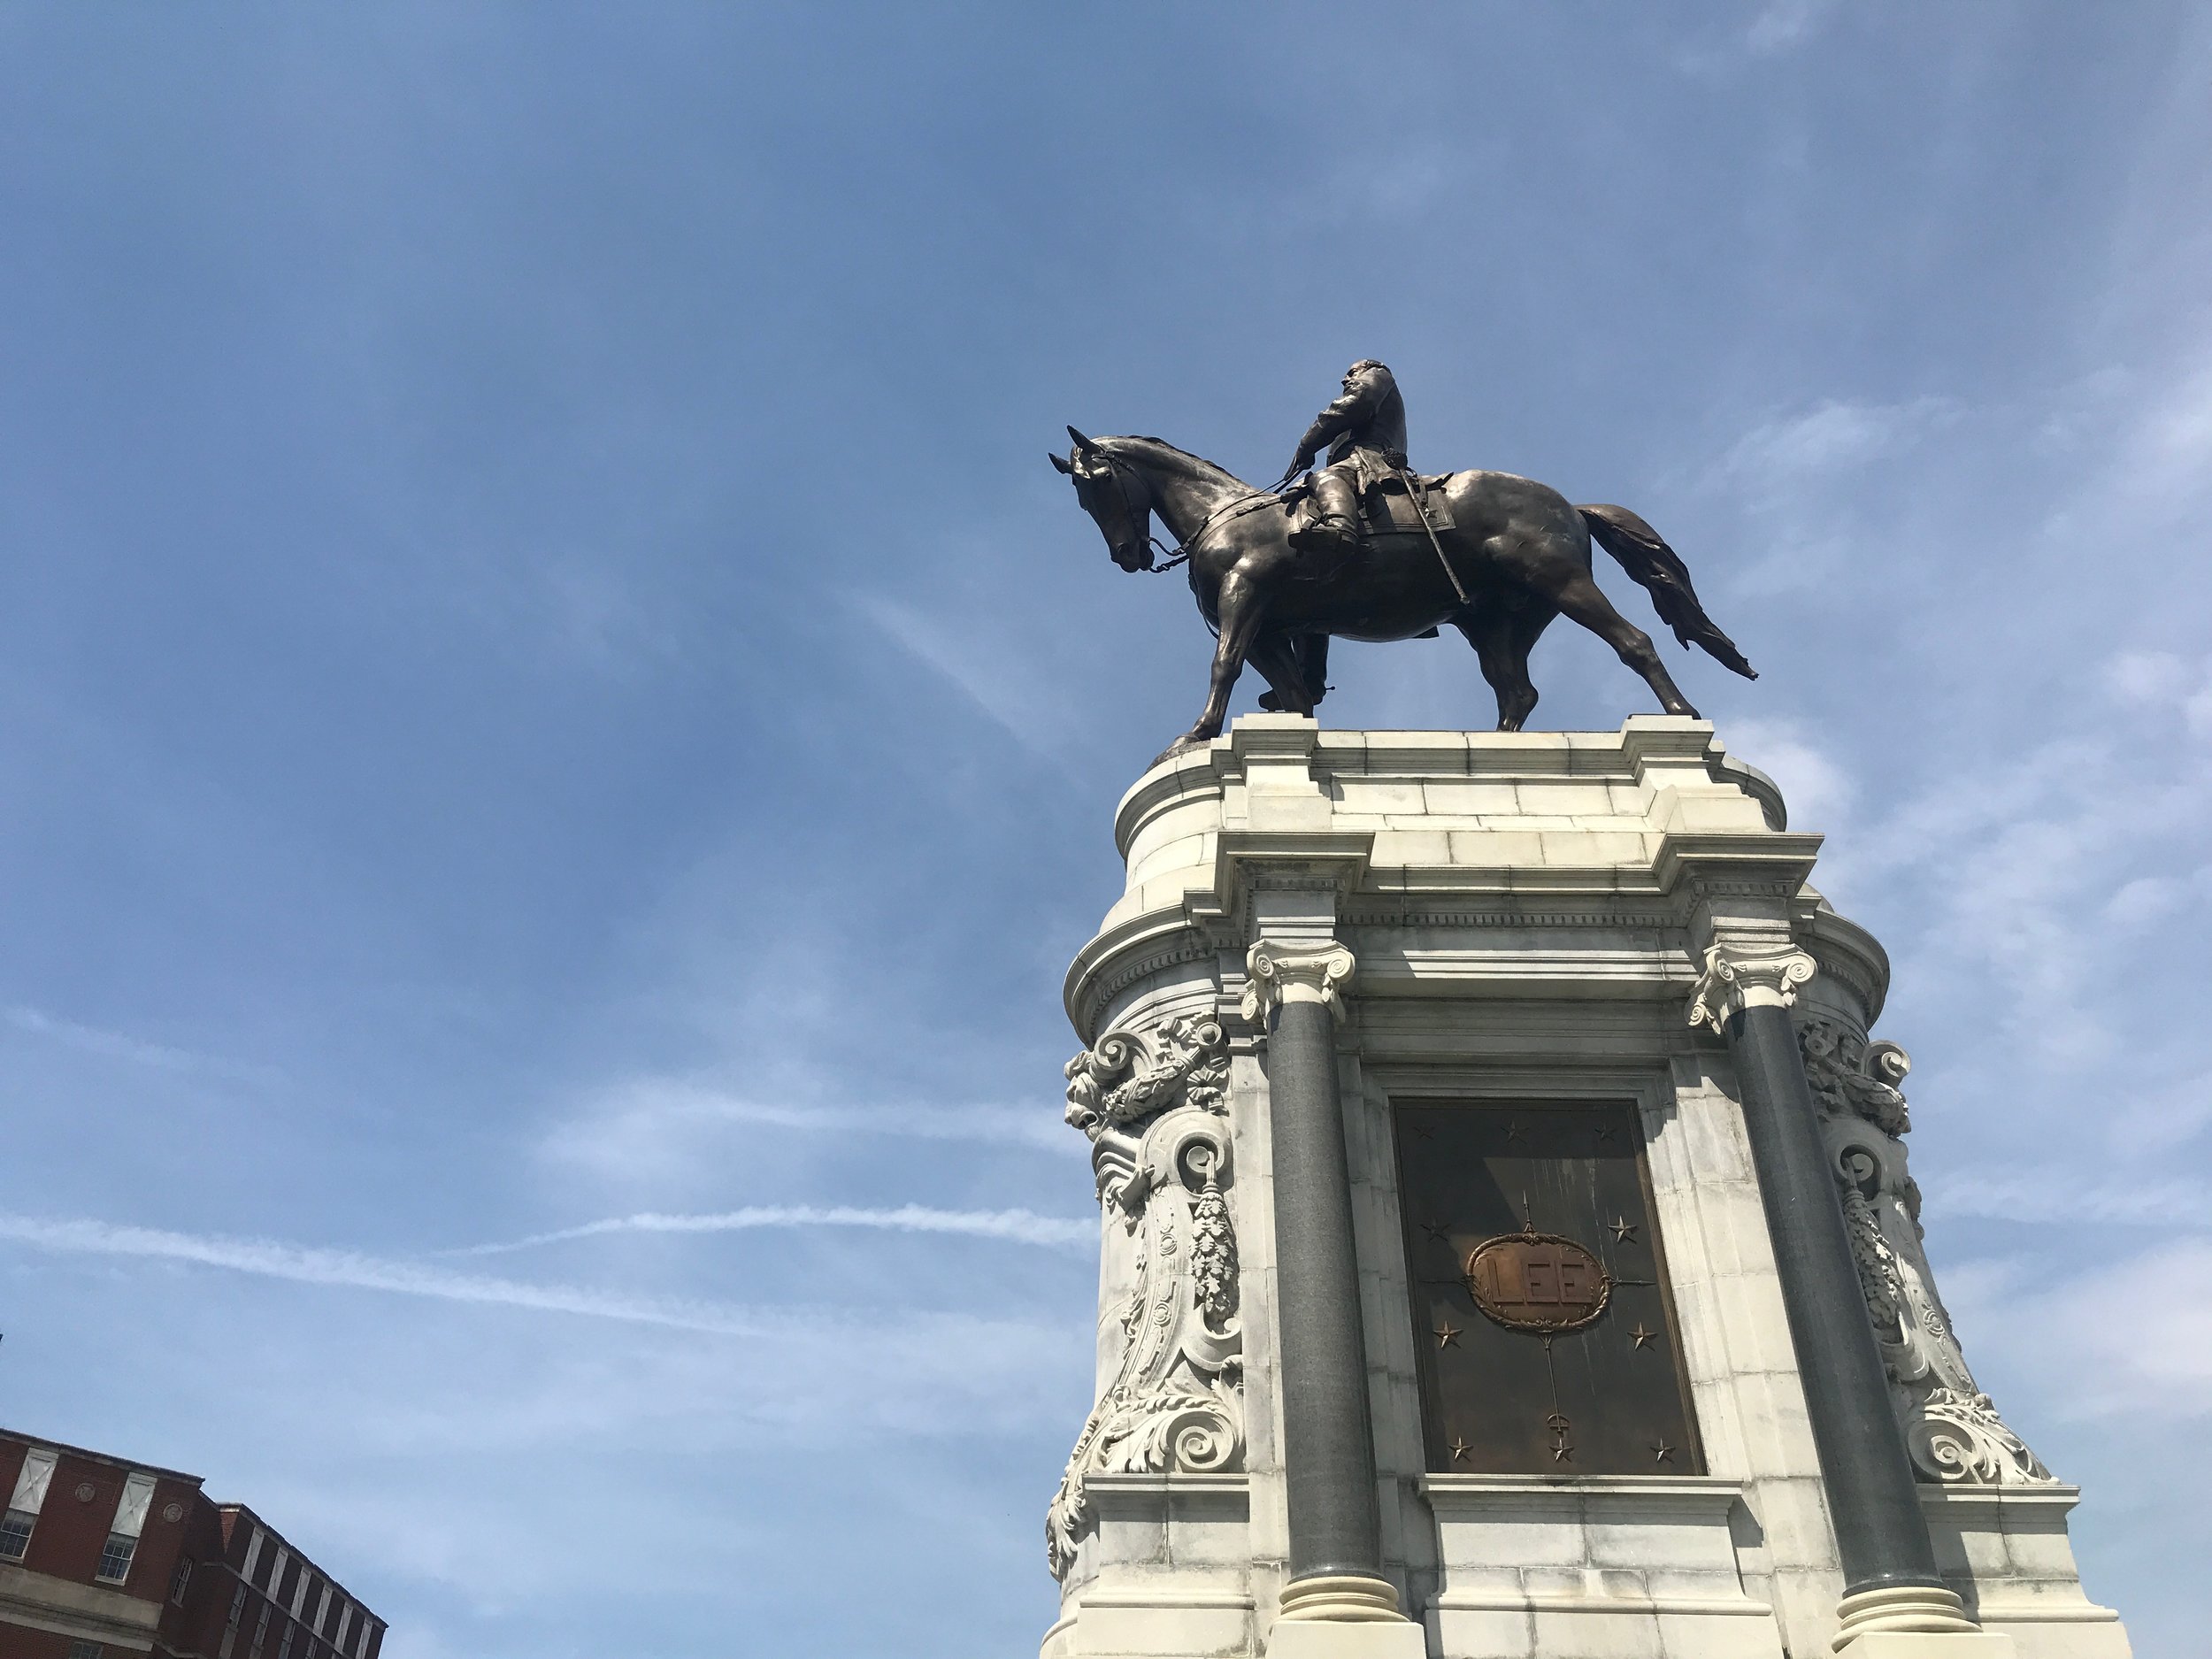  A huge statue of Robert E. Lee stands in Richmond, where the electorate  and city officials, now mostly African American, no longer buy into  "Lost Cause" history. 